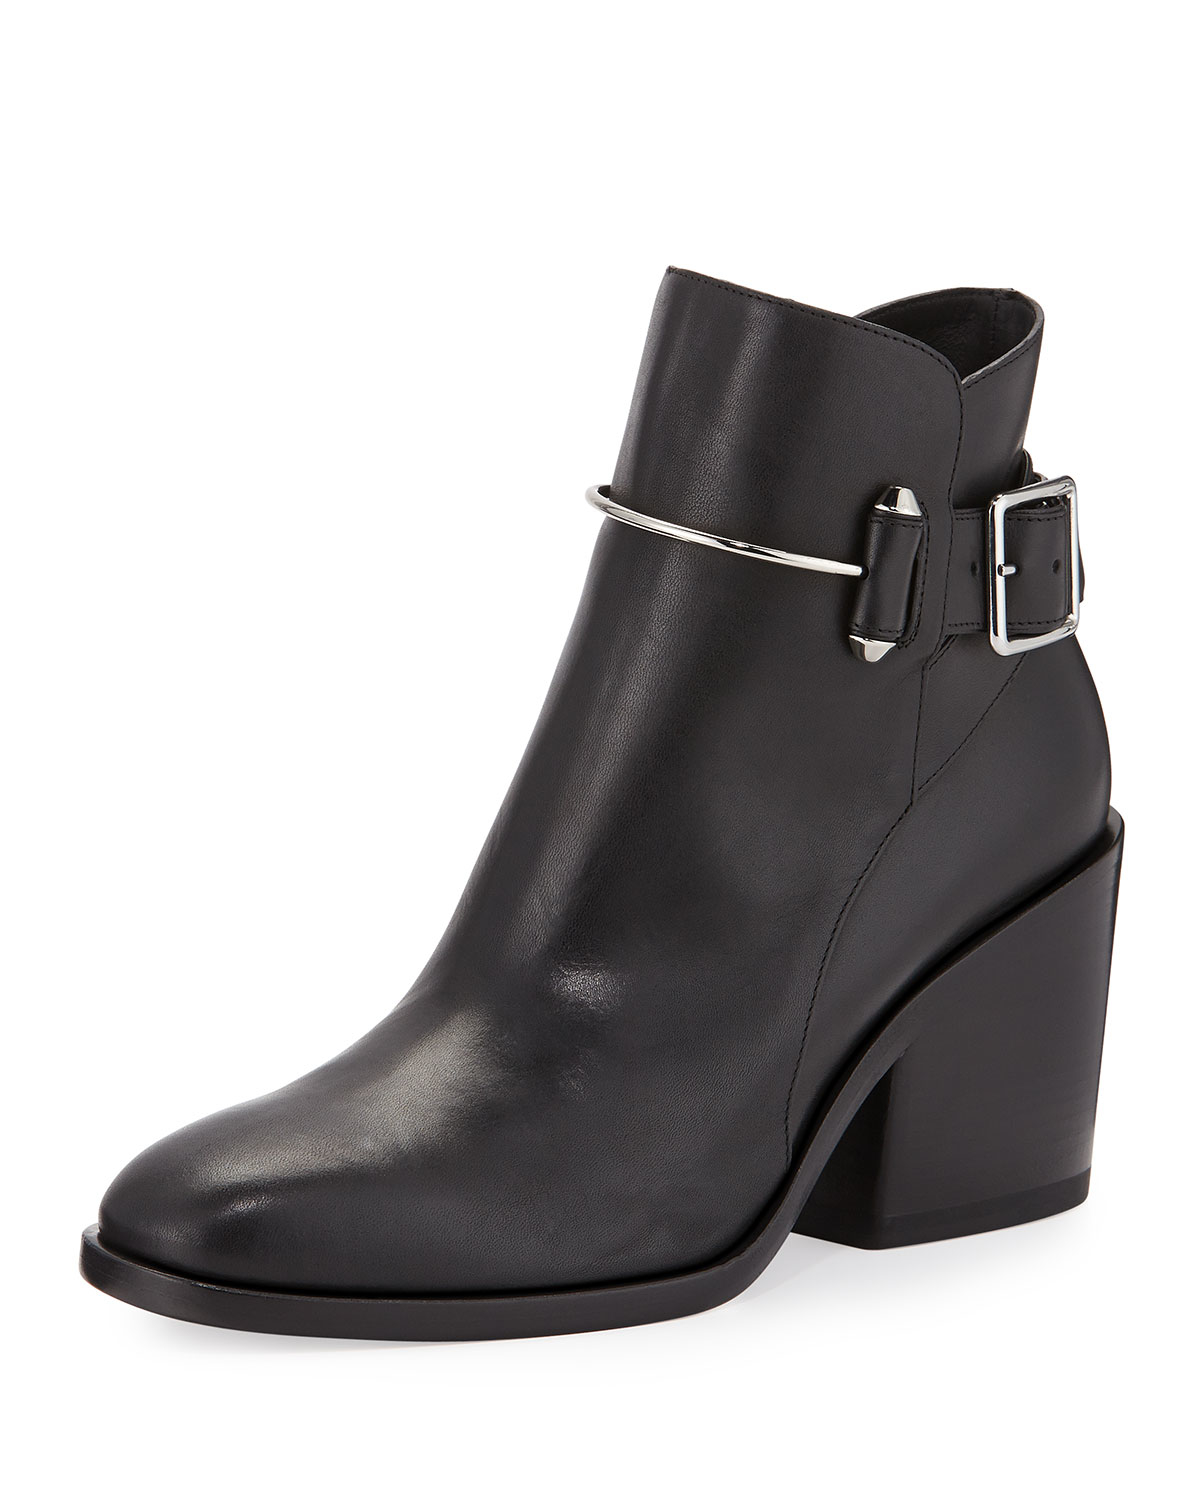 Lyst - Balenciaga Leather Chunky-heel Ankle Boot in Black